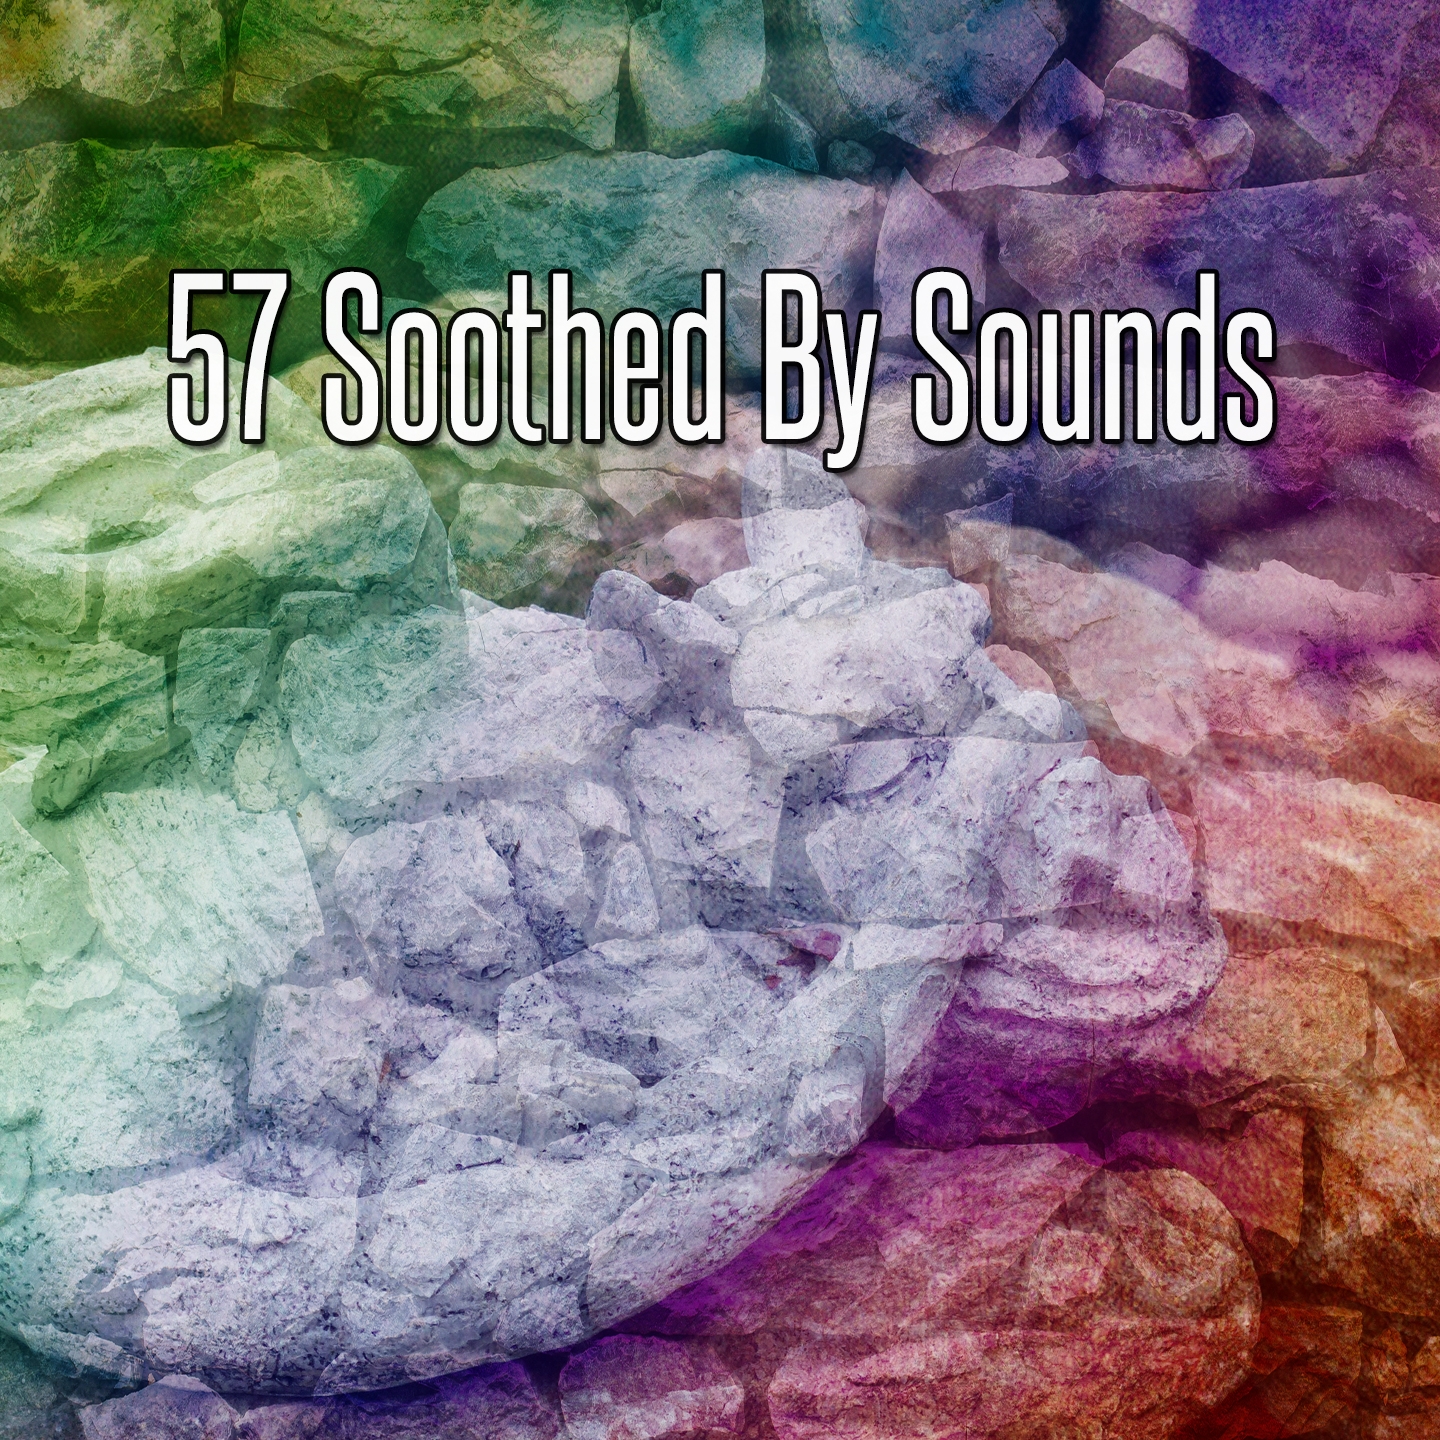 57 Soothed By Sounds